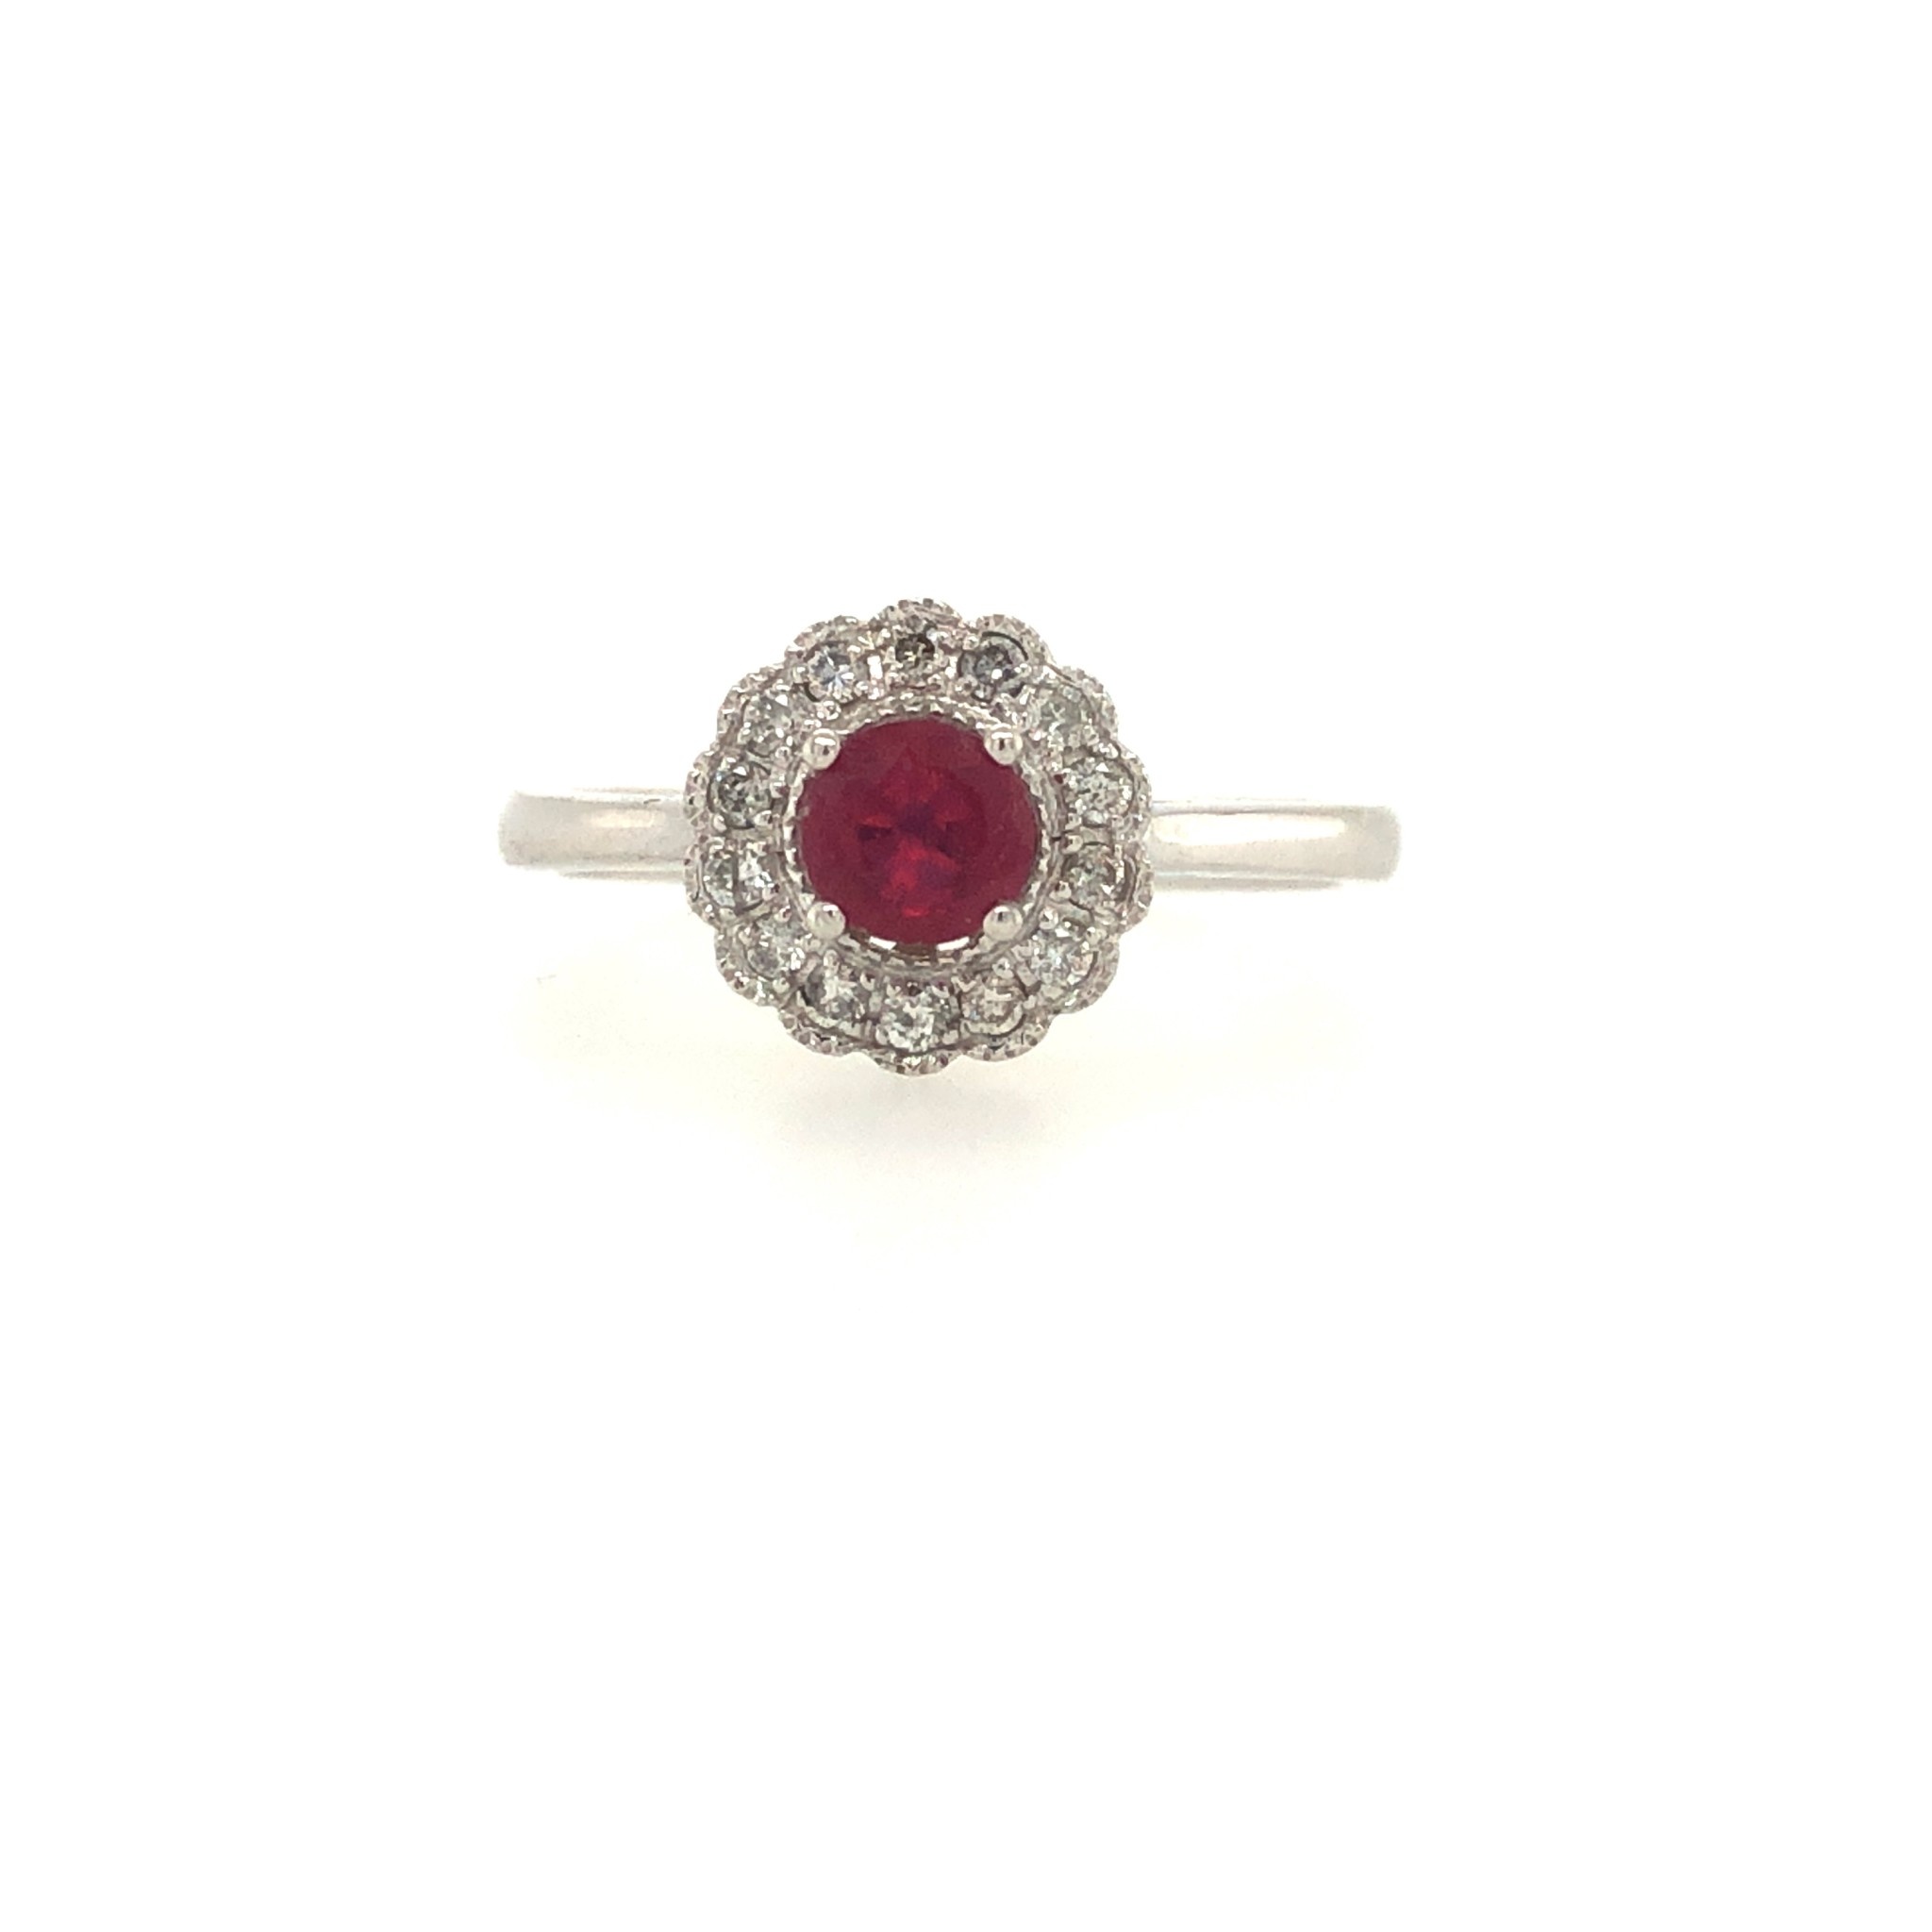 40101 10K WHITE GOLD ANTIQUE DESIGN ROUND RUBY CENTER AND DIAMOND HALO RING